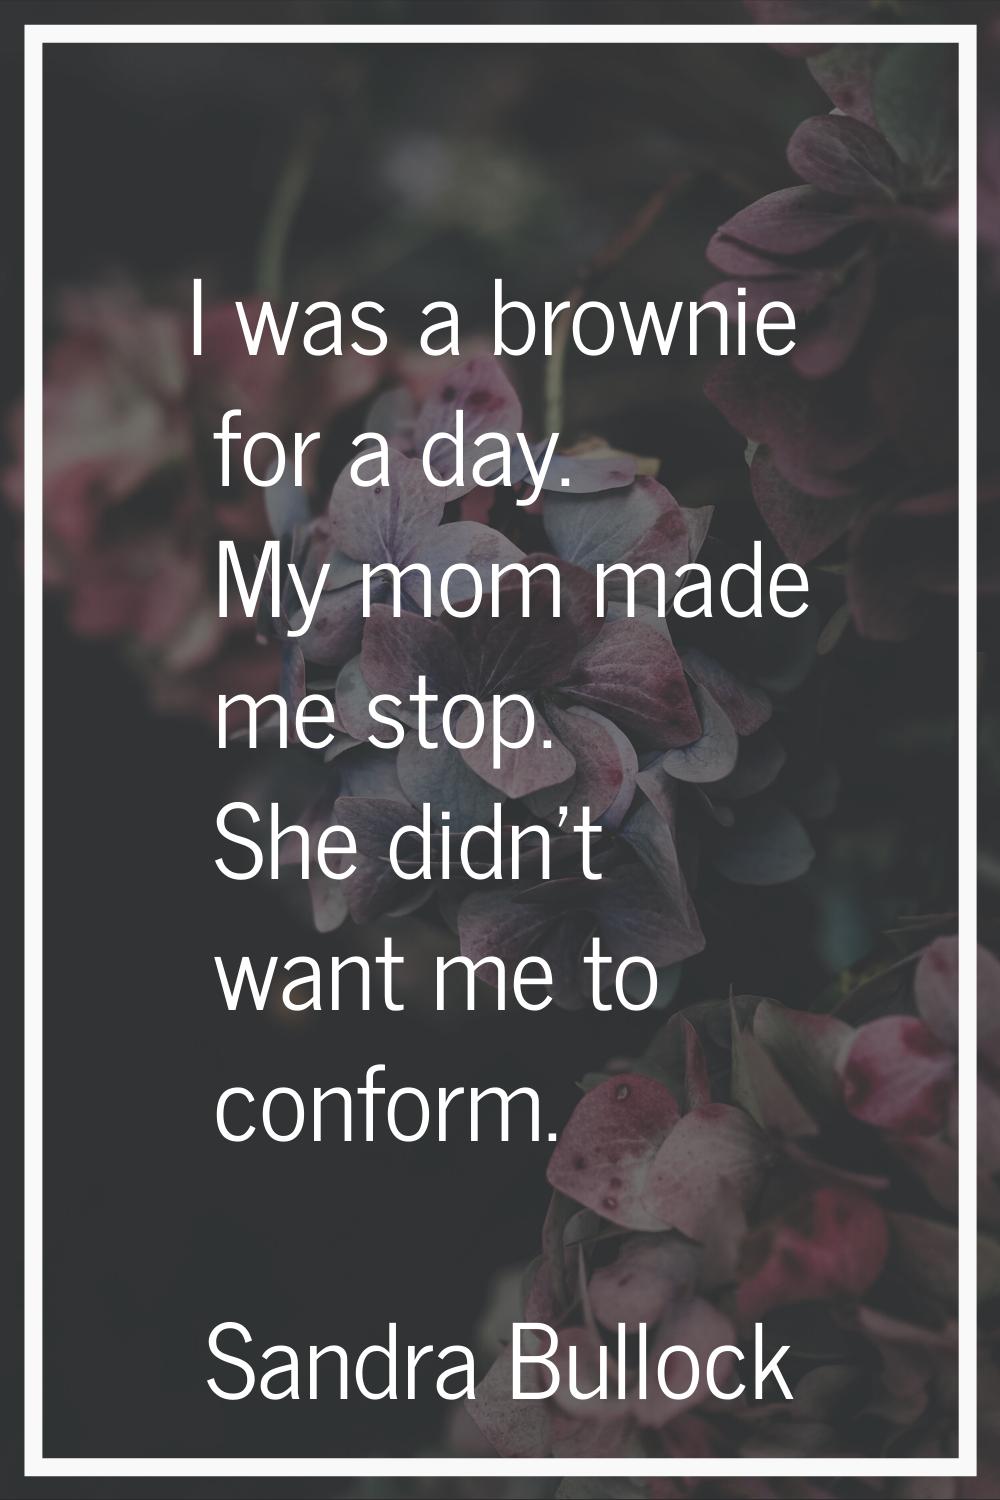 I was a brownie for a day. My mom made me stop. She didn't want me to conform.